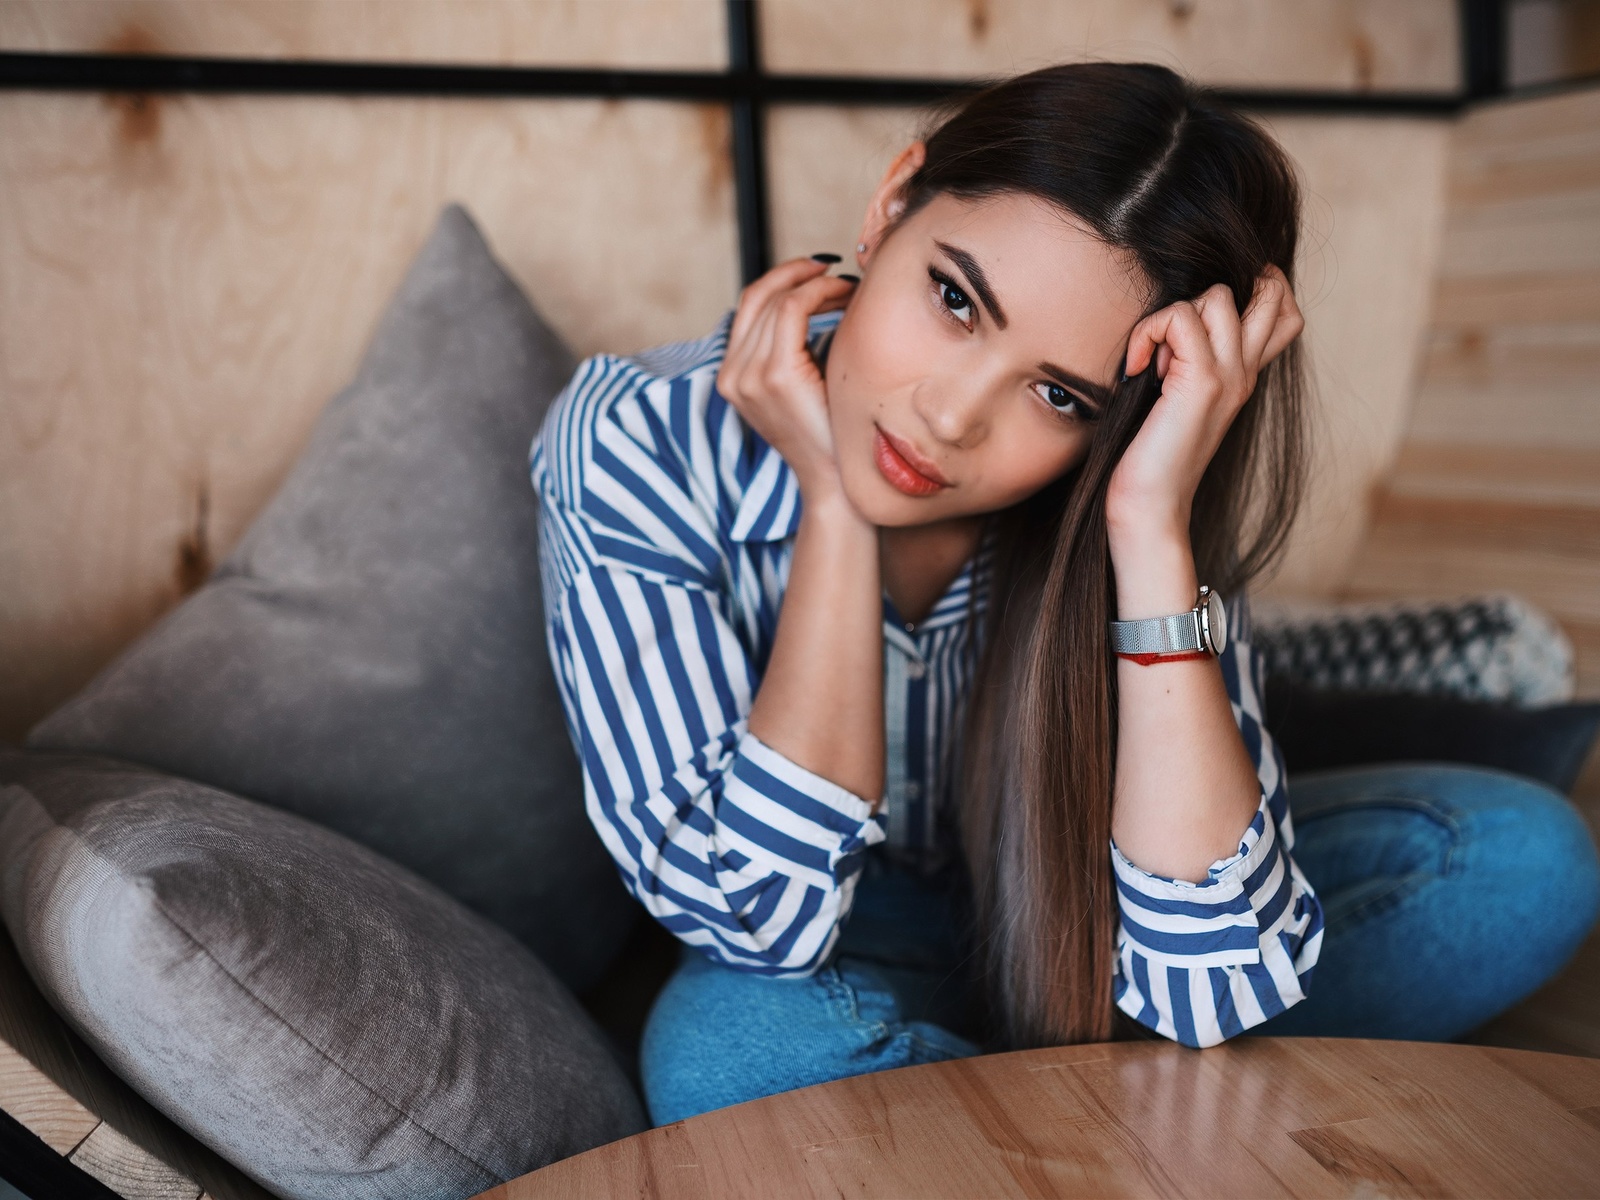 women, model, brunette, women indoors, asian, jeans, striped shirt, couch, table, watch, sitting